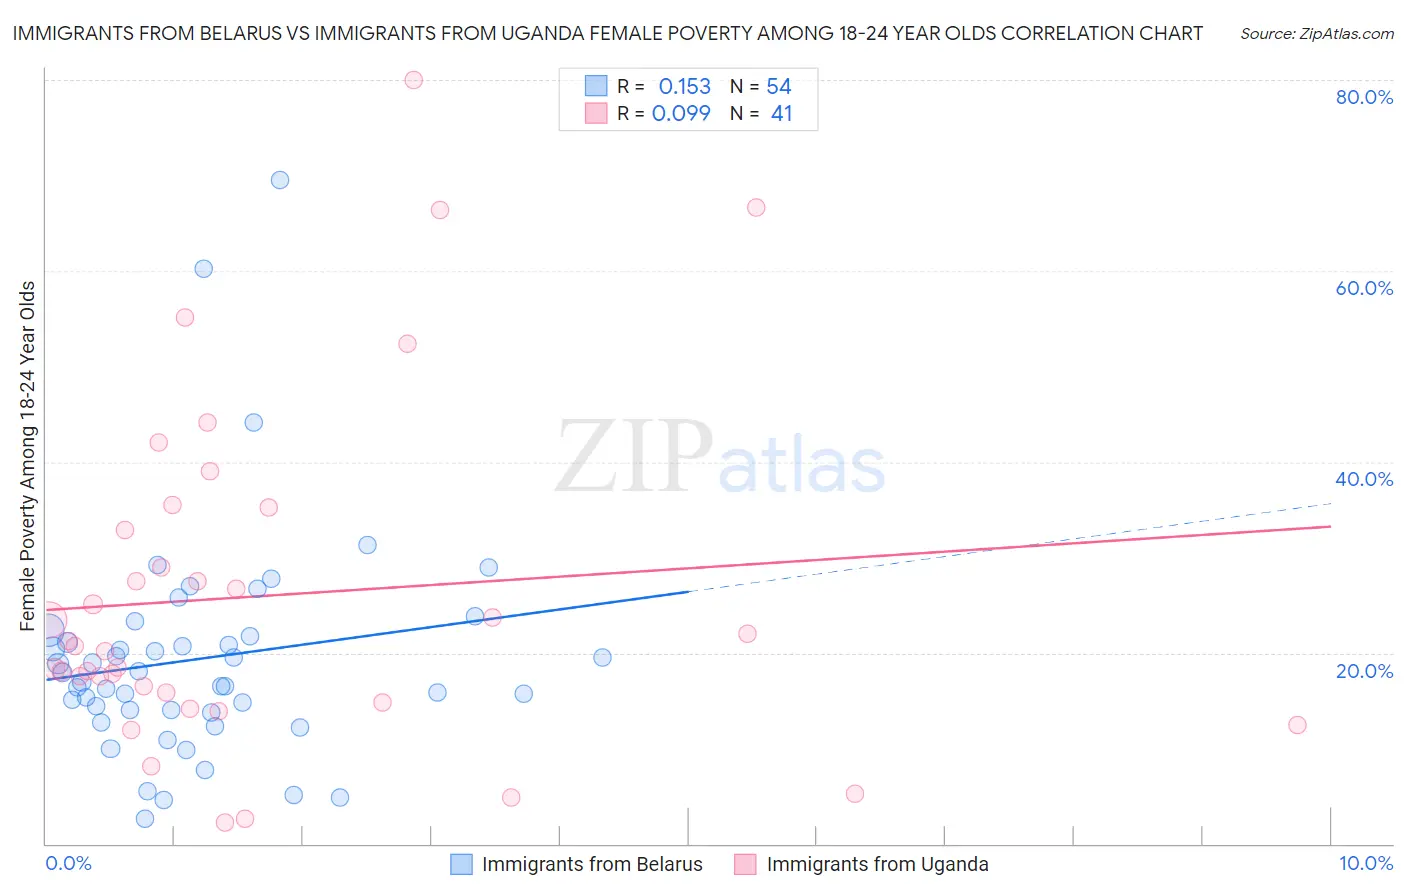 Immigrants from Belarus vs Immigrants from Uganda Female Poverty Among 18-24 Year Olds